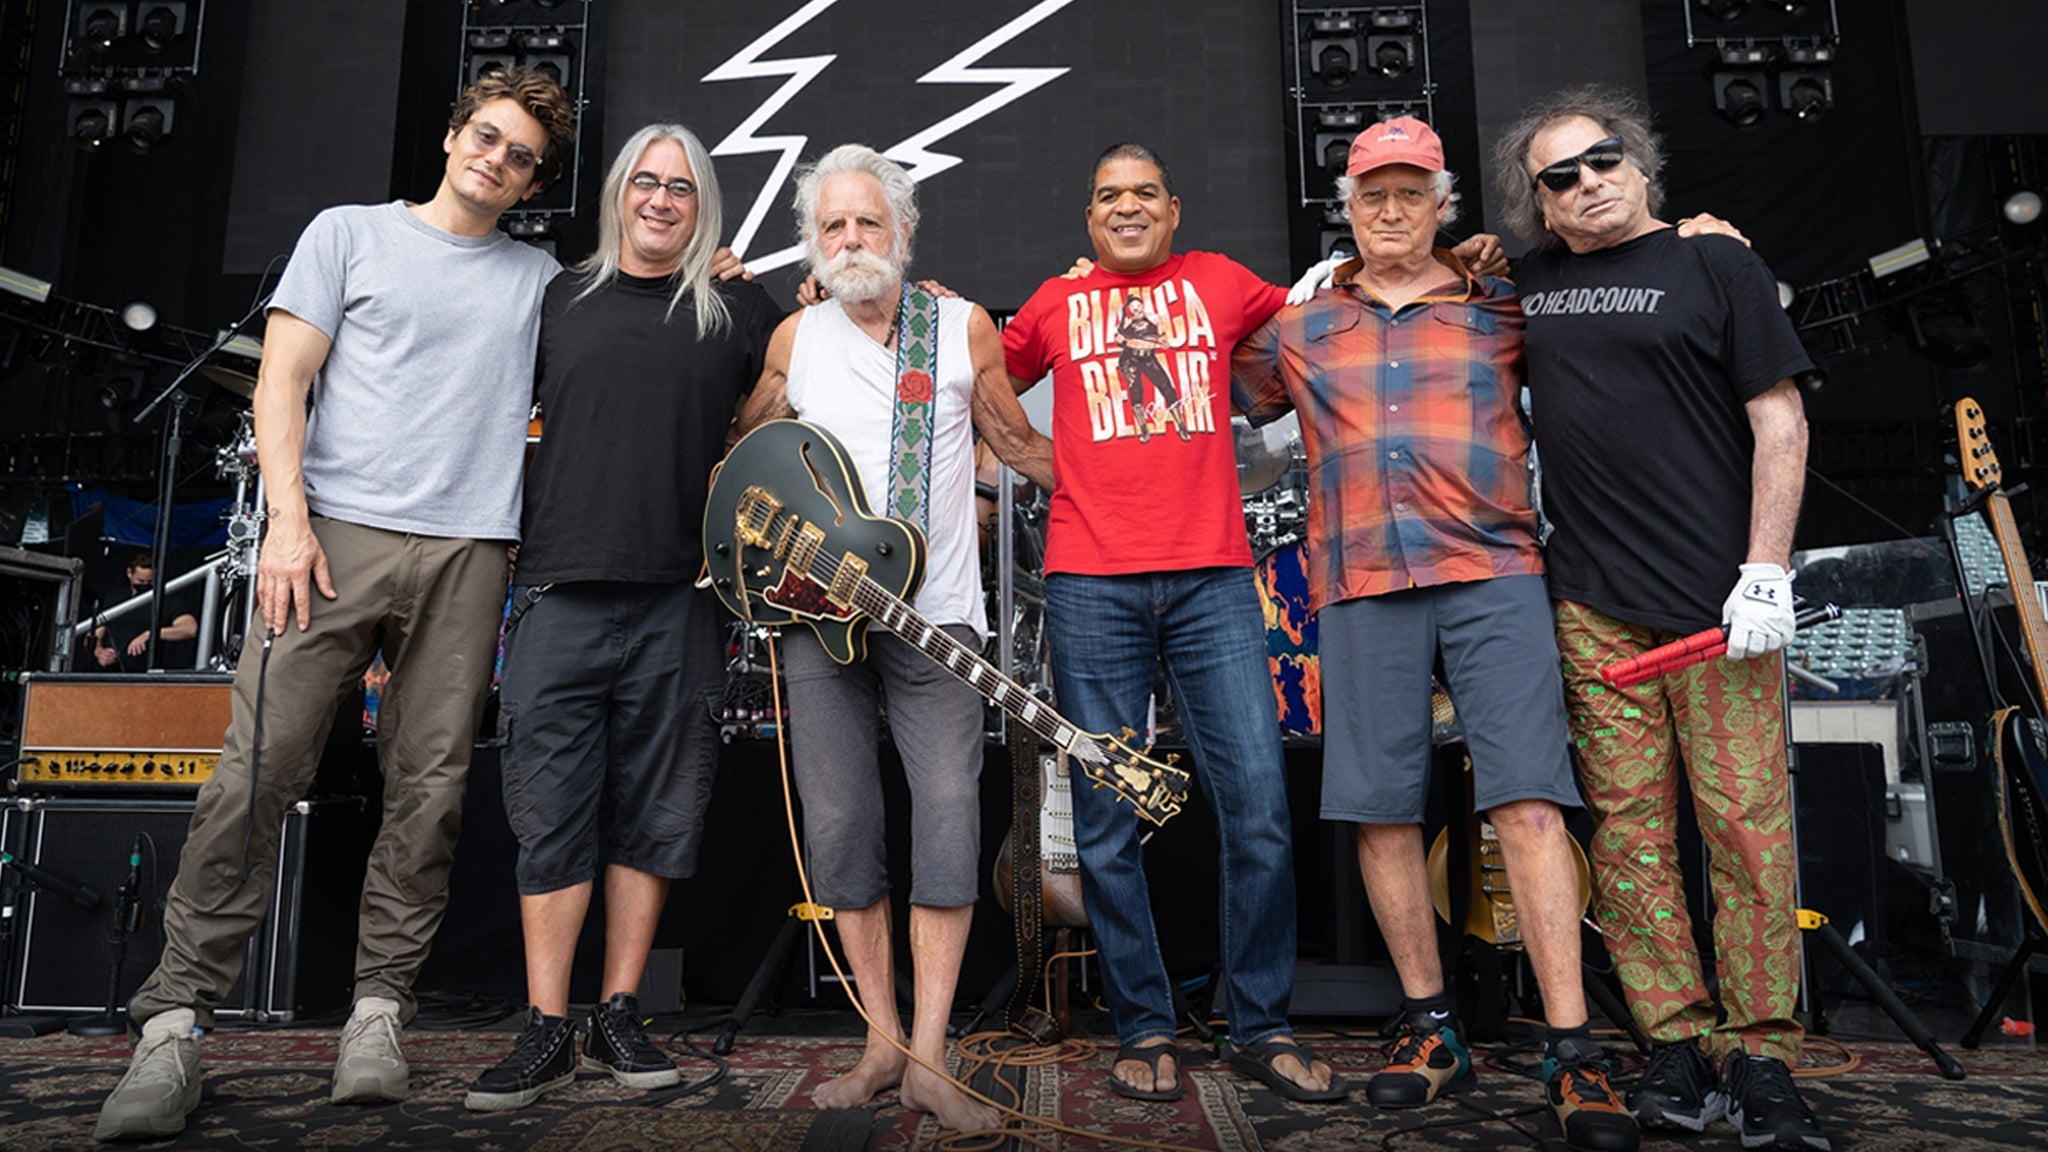 Dead & Company - The Final Tour at Jiffy Lube Live